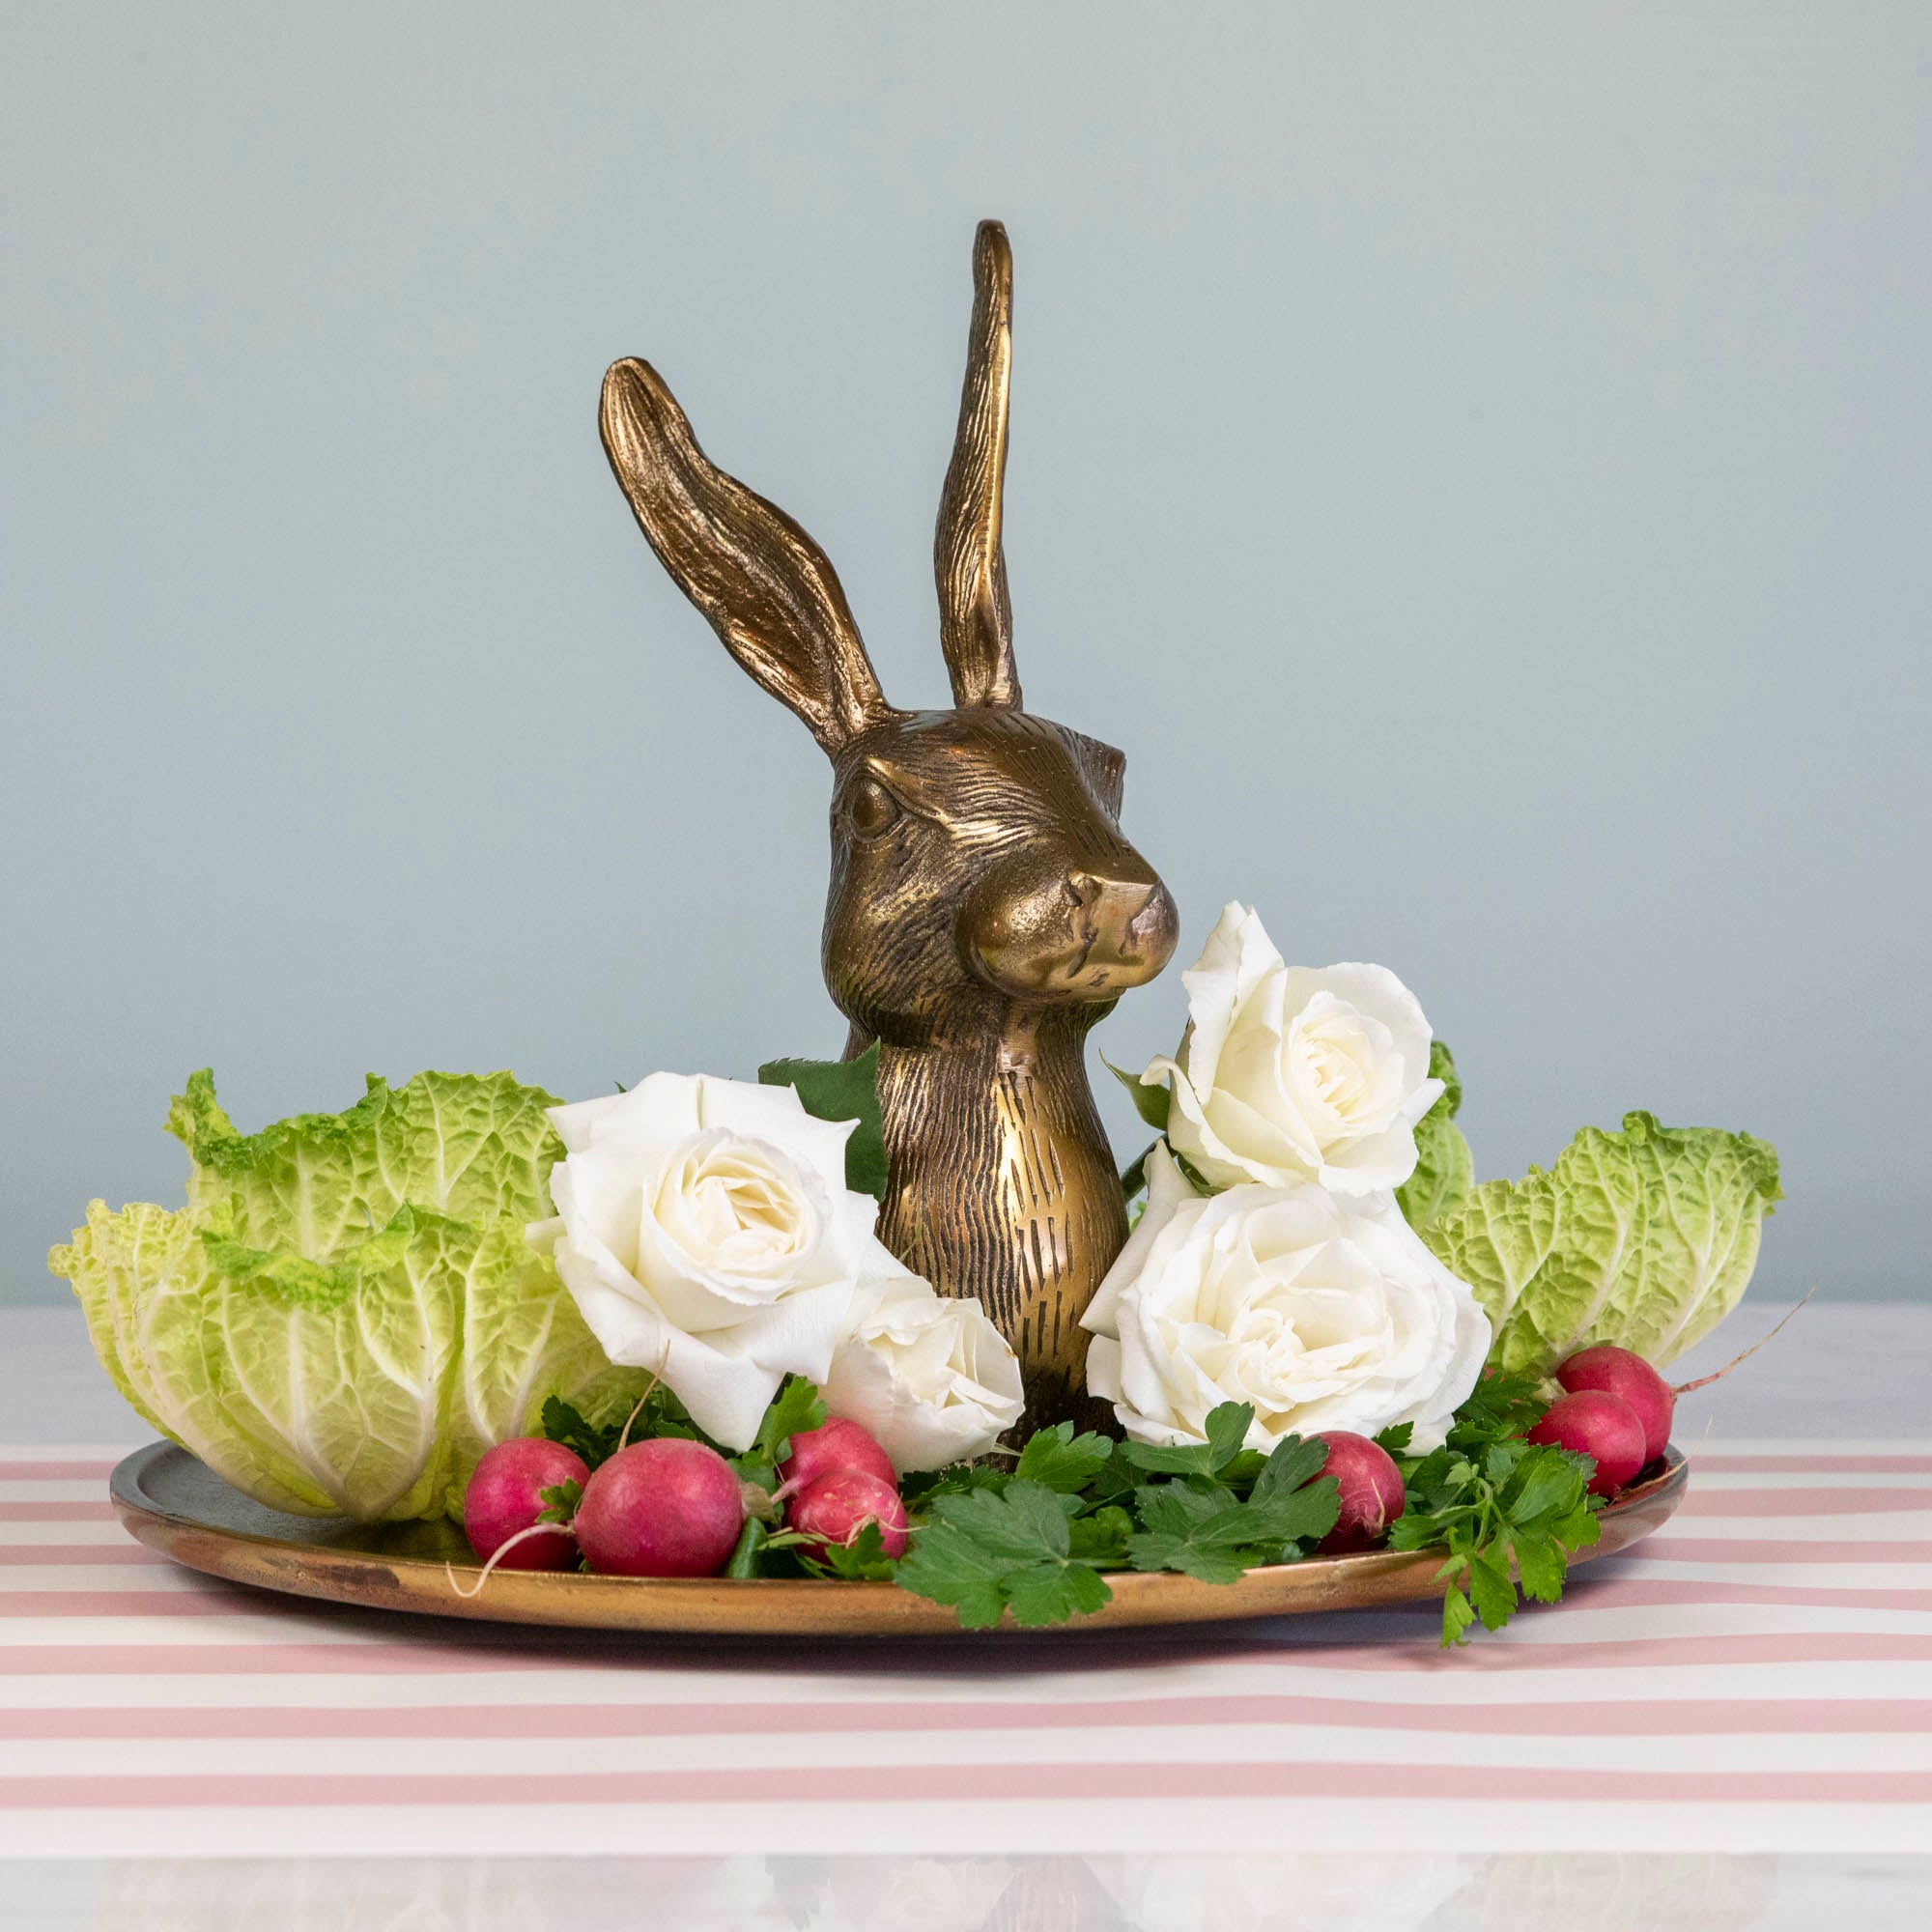 A whimsical Hare Platter from Accent Decor, featuring a gold bunny head with radishes and flowers, on a table.